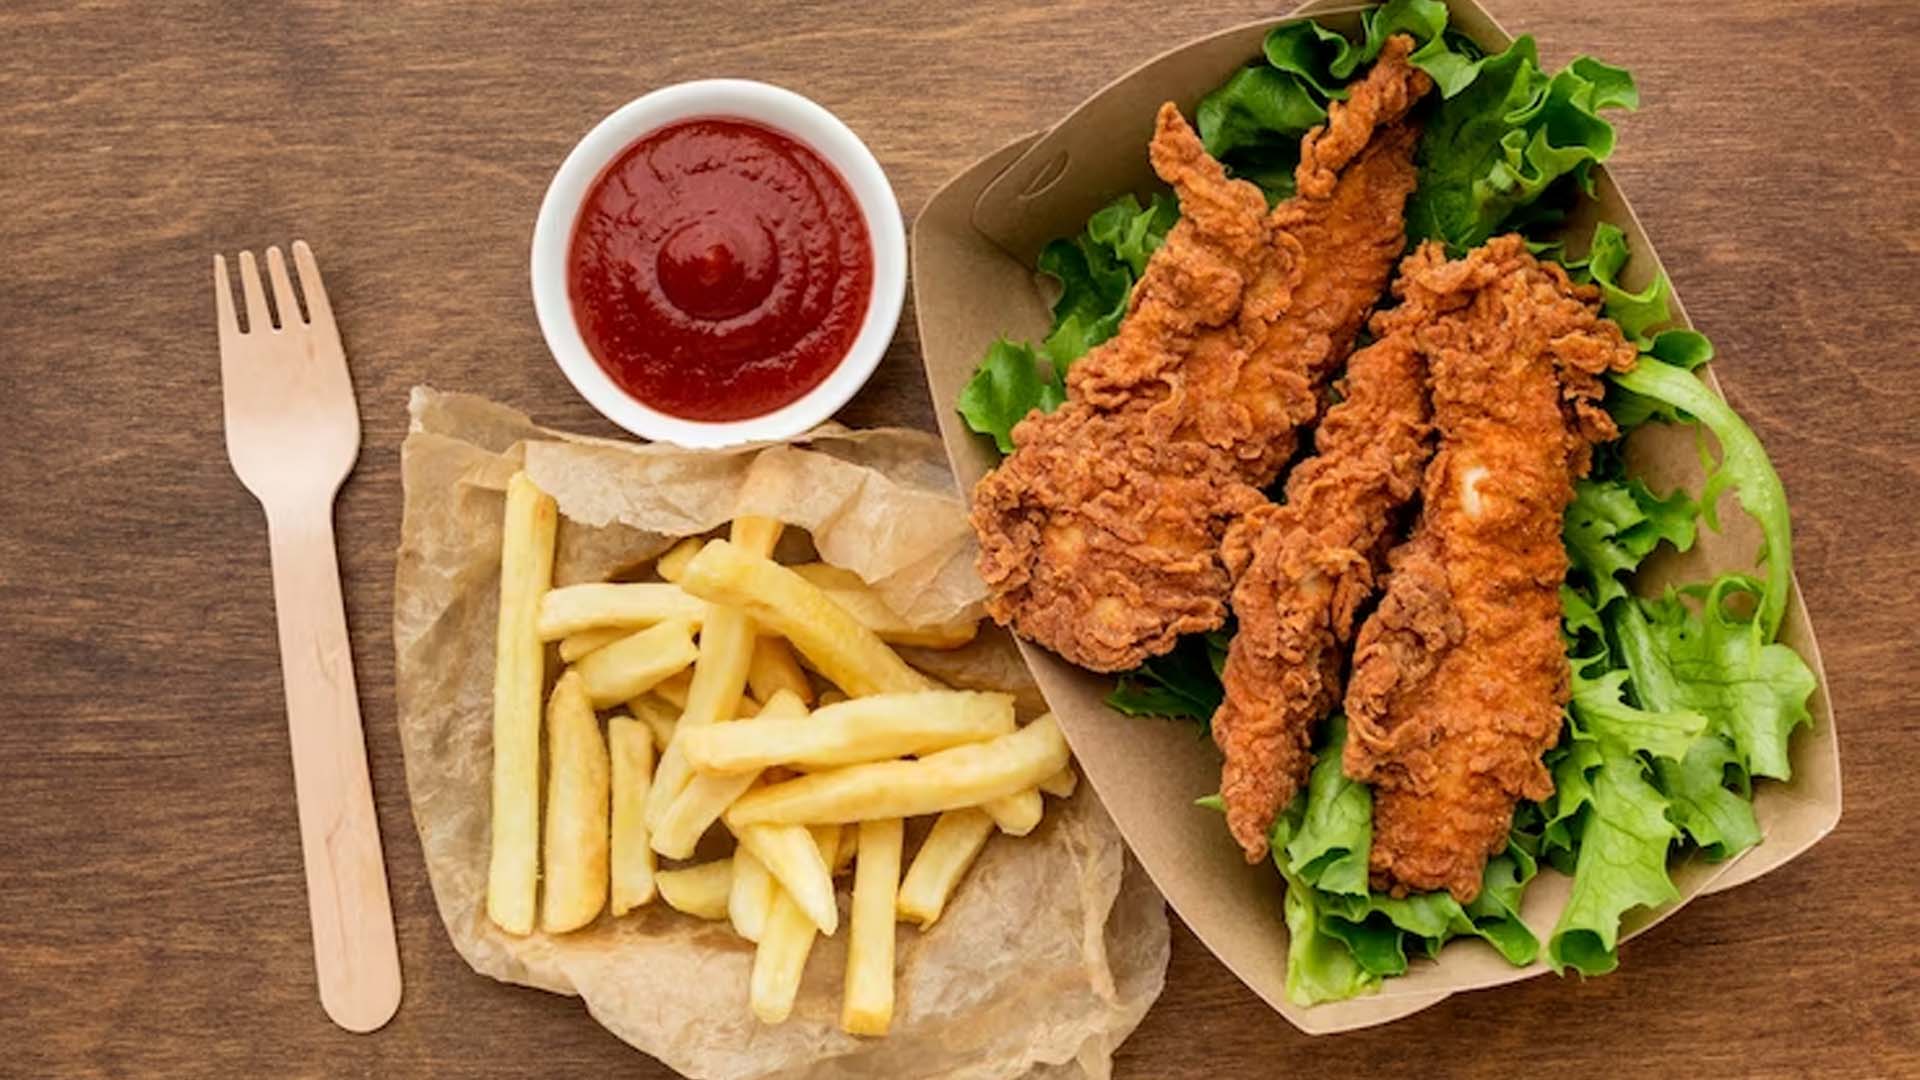 Fried Chicken and French fries